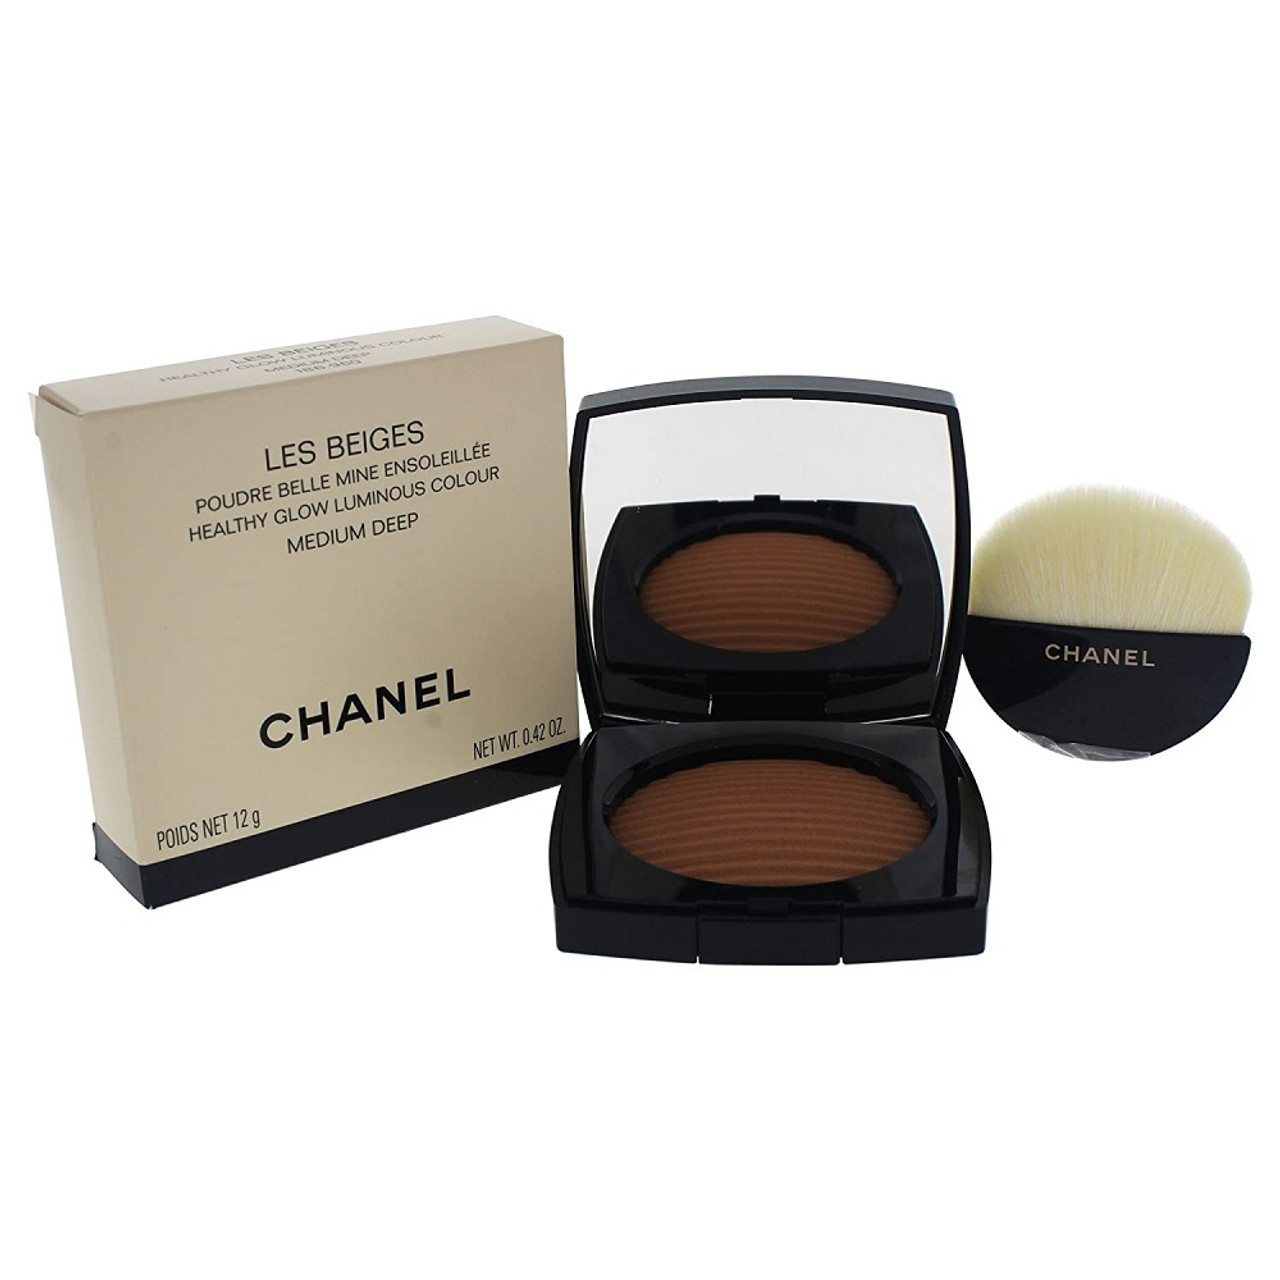 CHANEL · Les Beiges Summer 2022 Collection